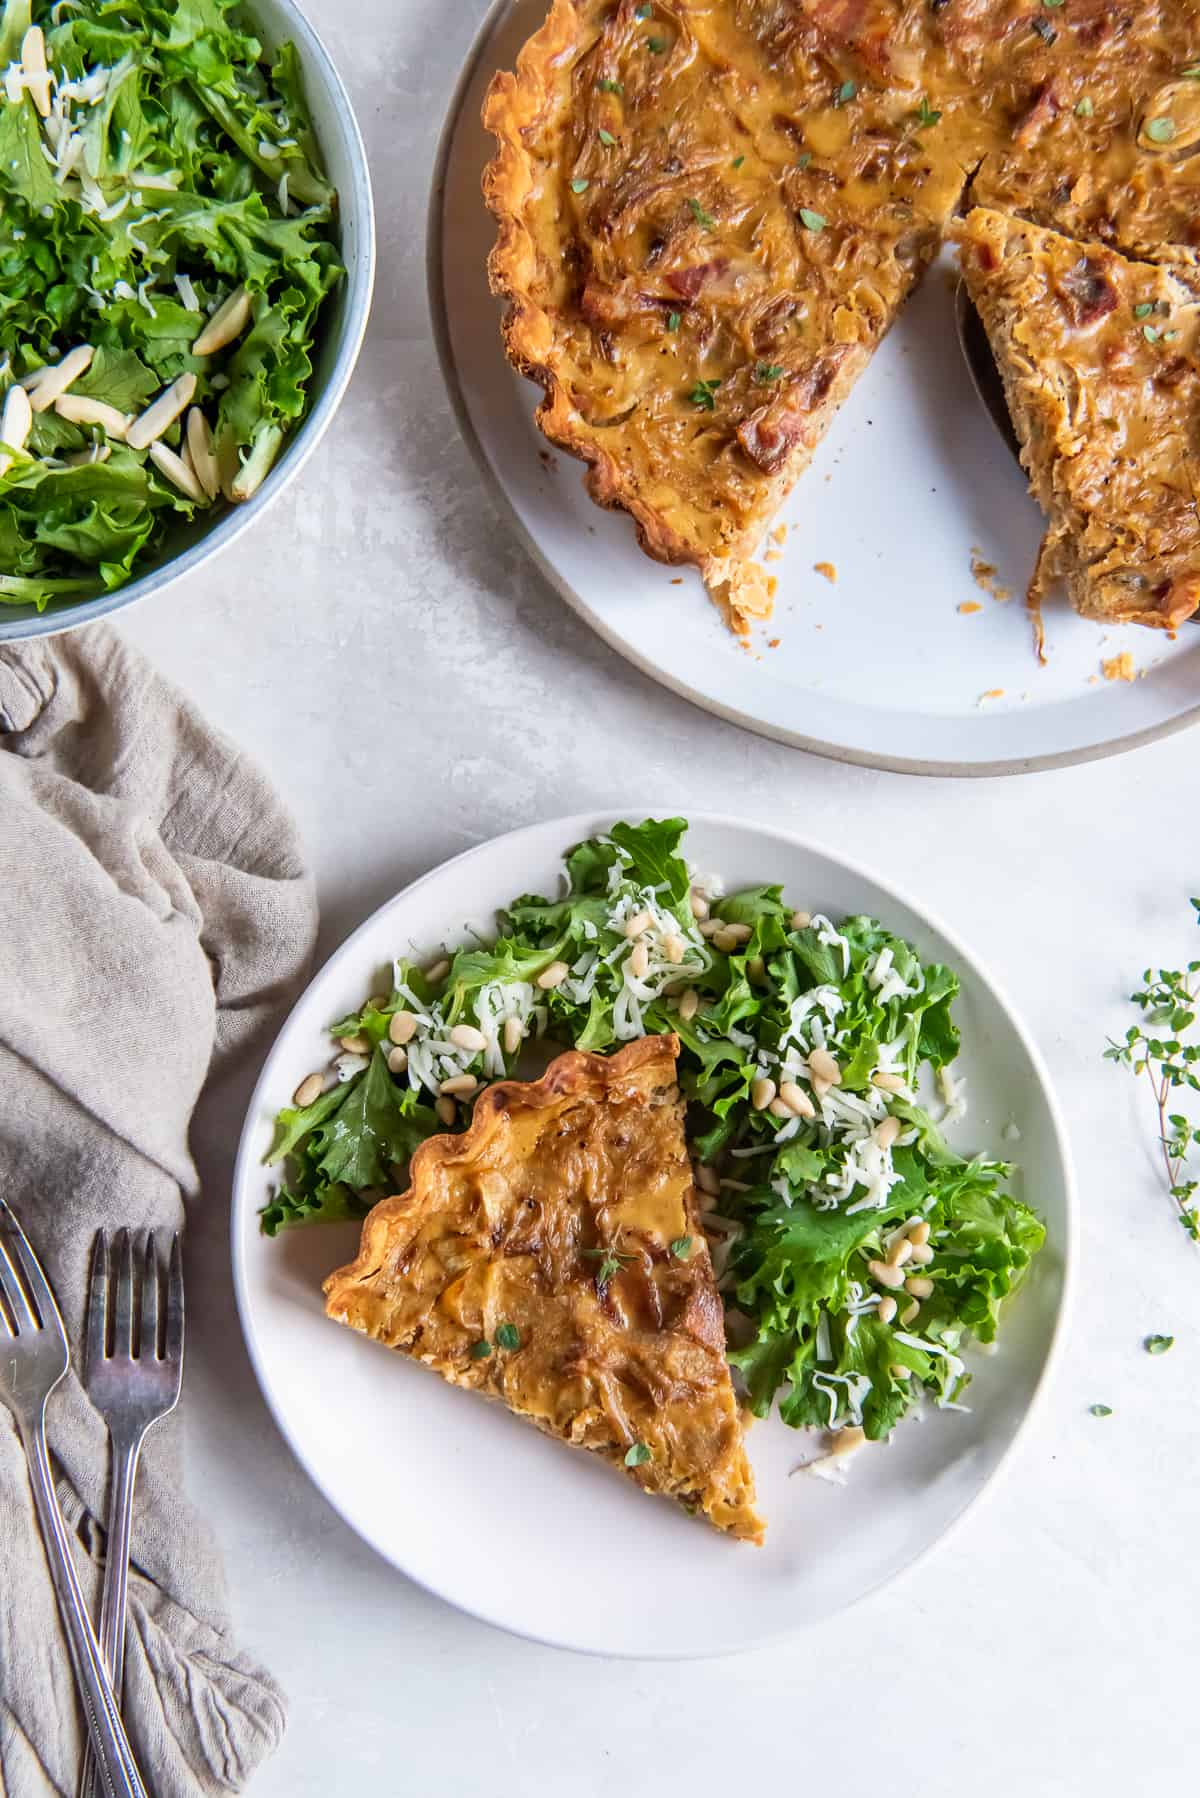 A plate with a slice of onion tart and green salad on a table.